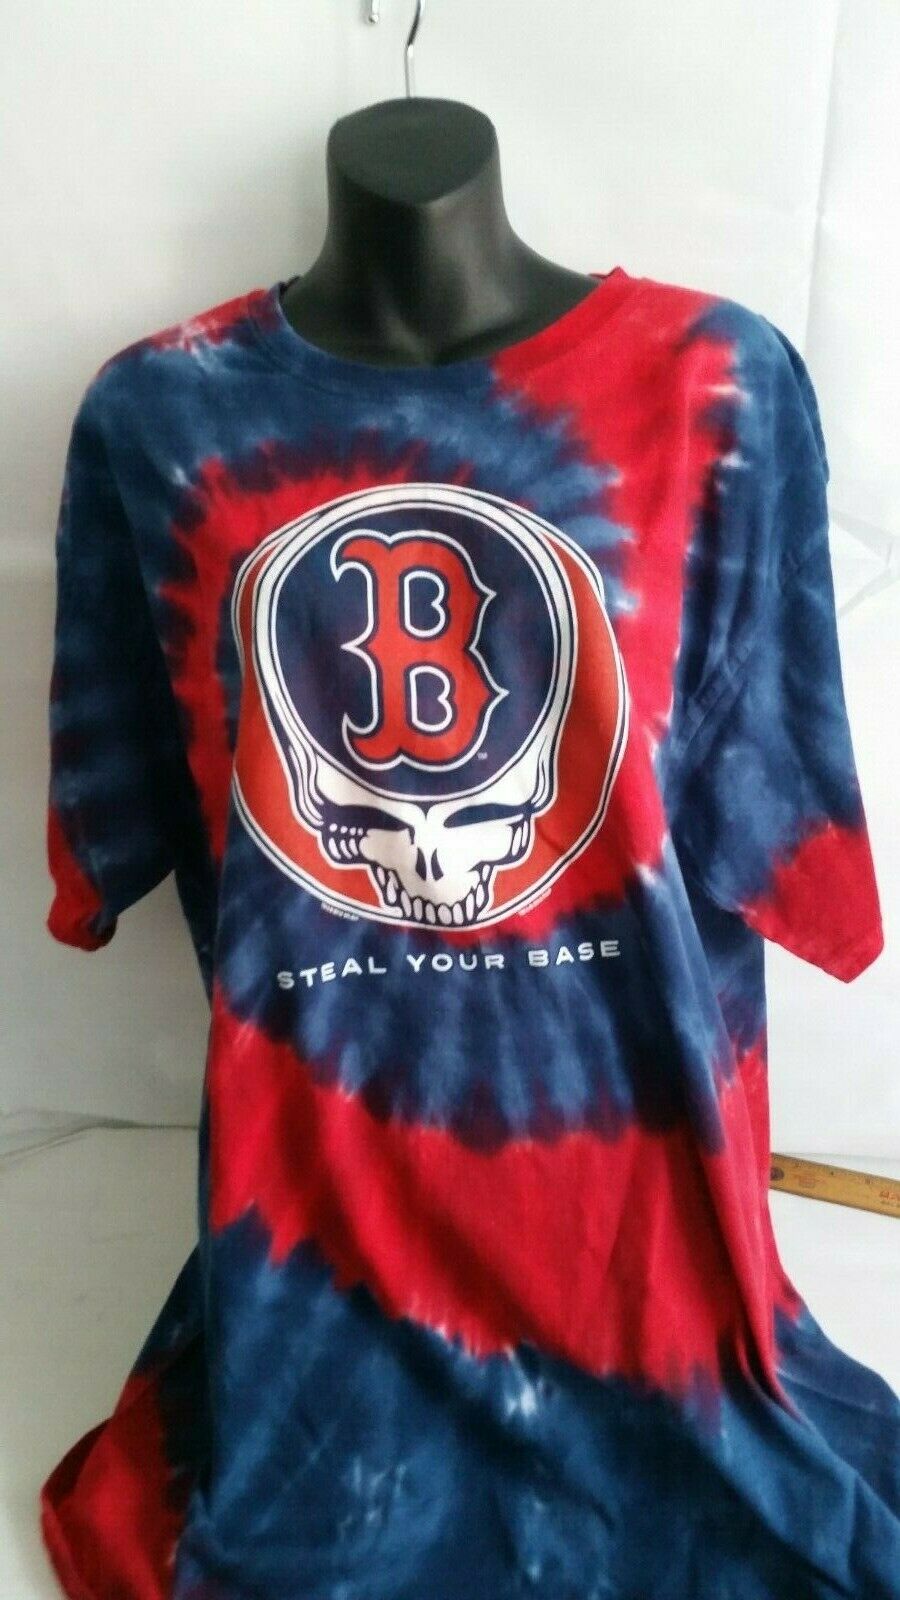 White Sox Tie Dye Steal Your Base 